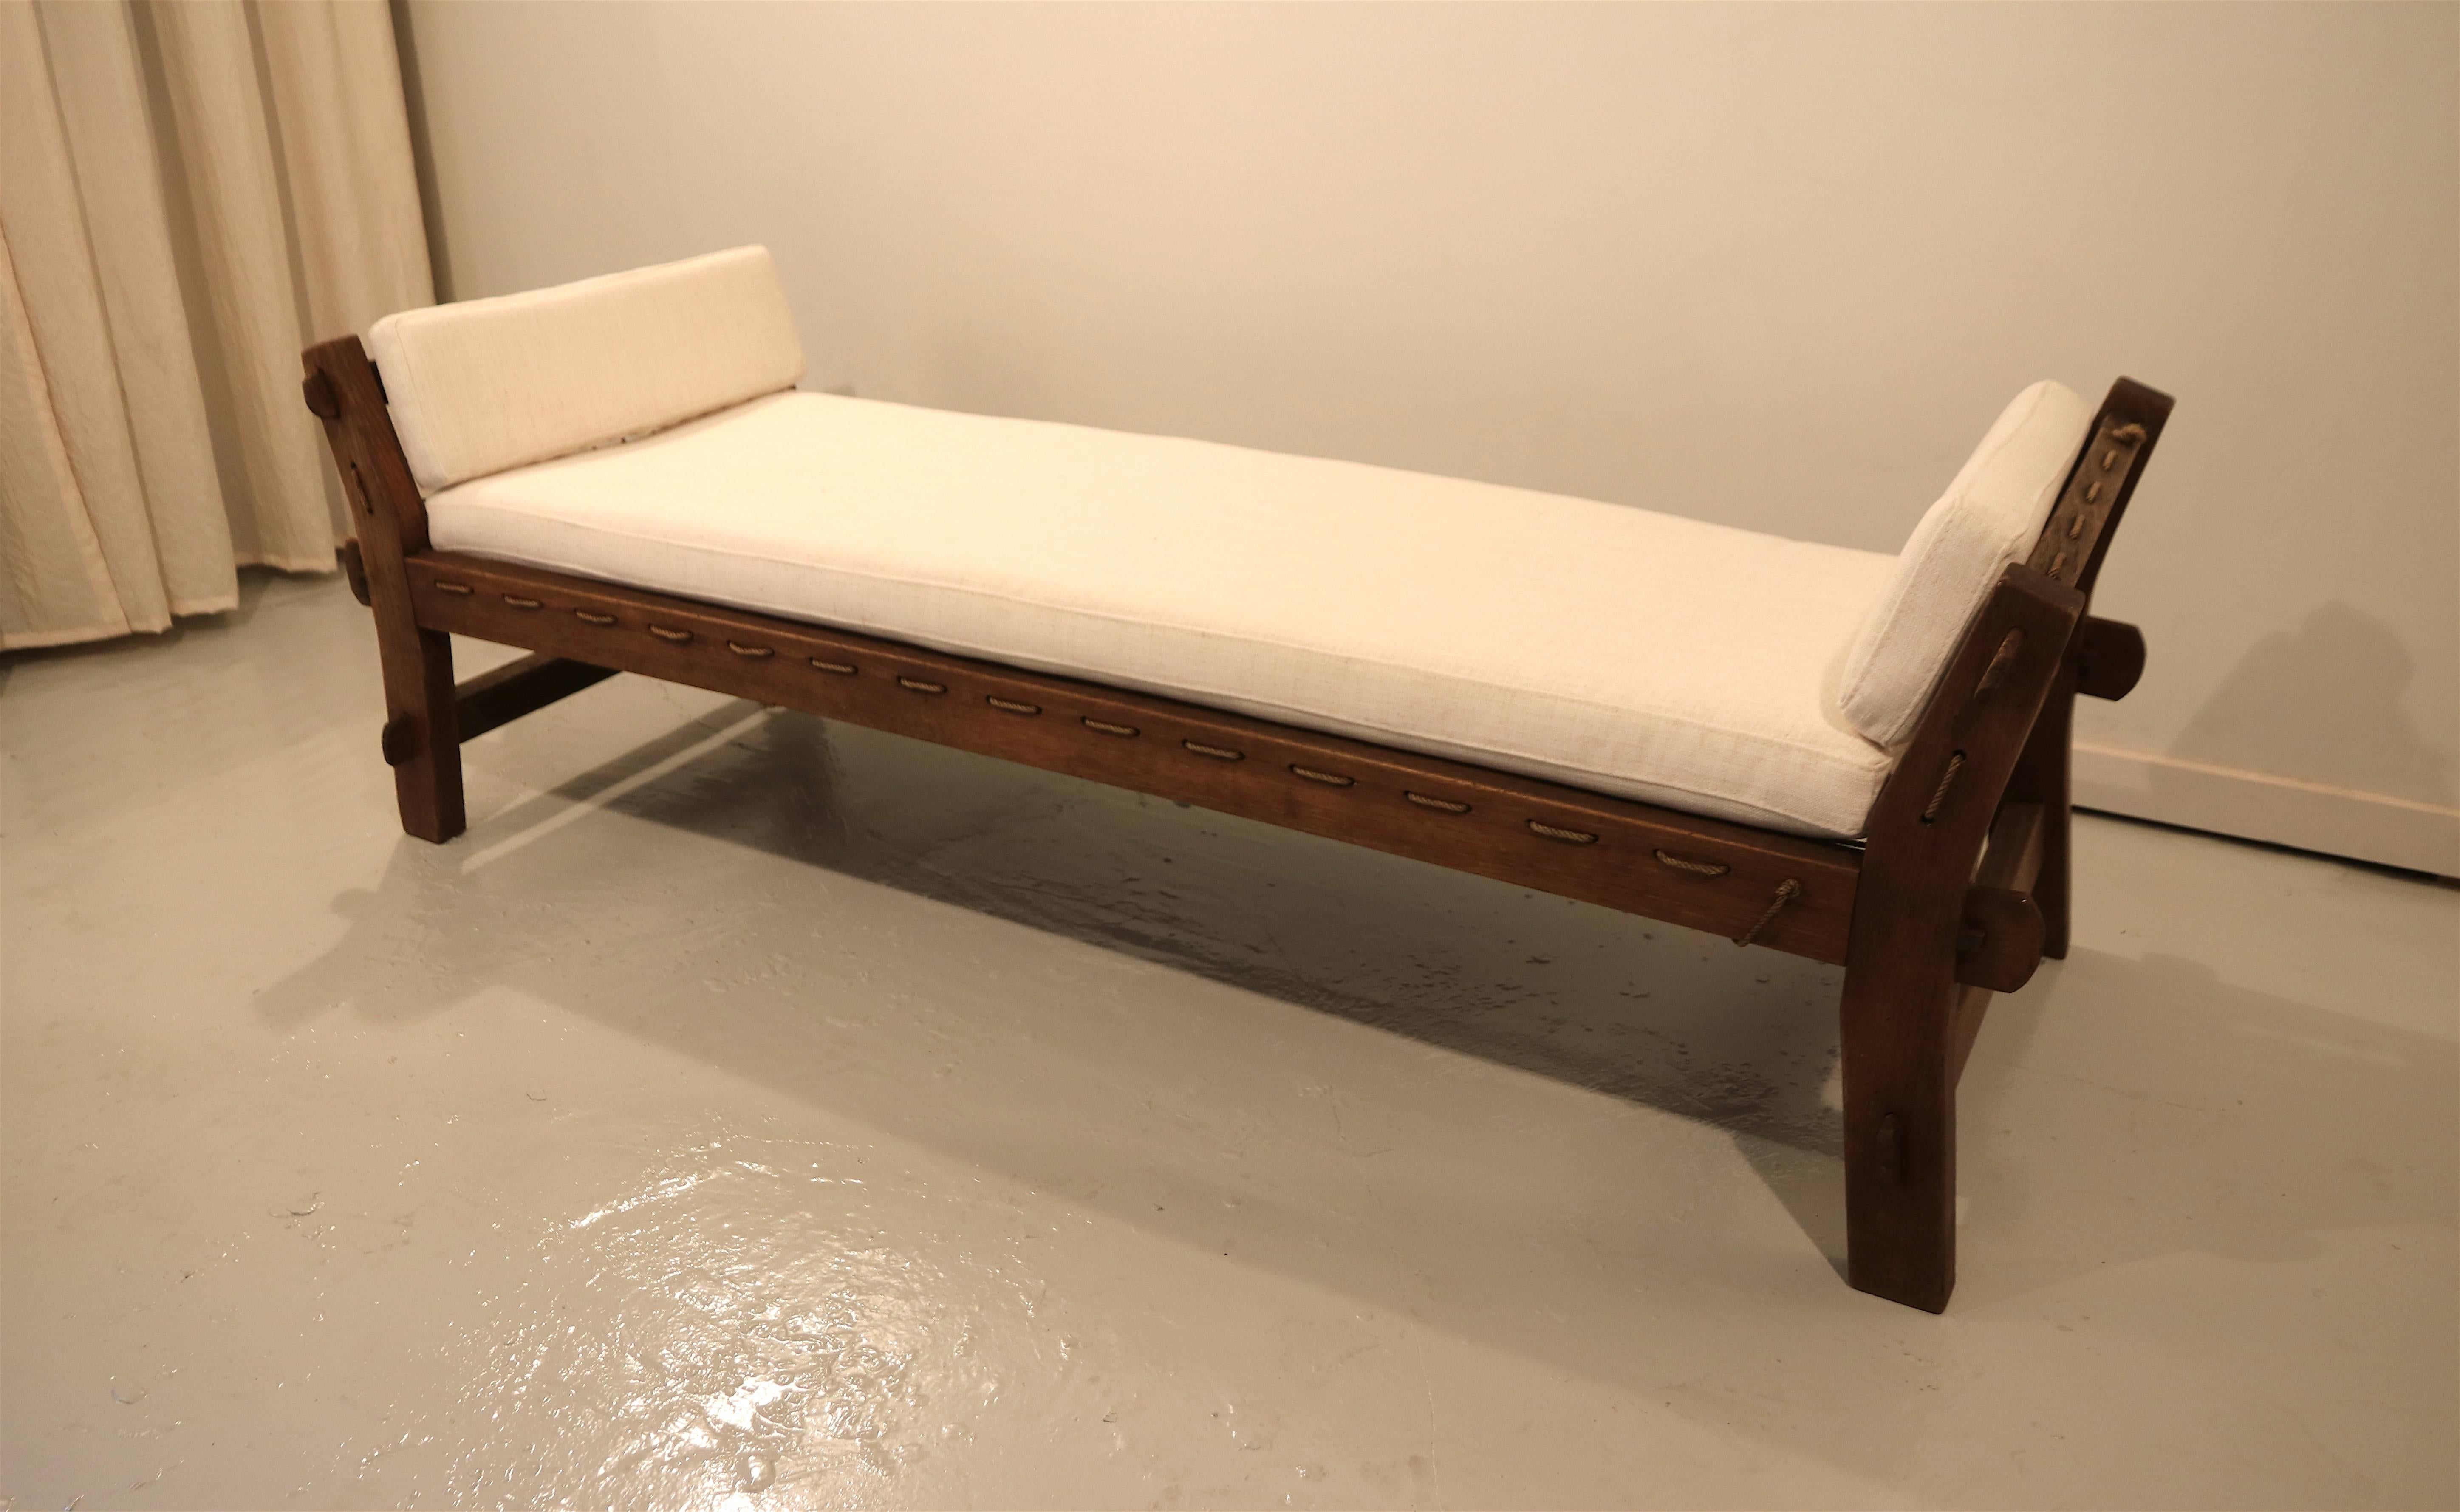 Beautiful oak daybed in the style of Charlotte Perriand, Jean Prouve and Pierre Jeanneret for Chandigarh, India. The piece has a solid wood frame with beautiful joints all around, no screws are used at all. The seat and sides are beautifully laced